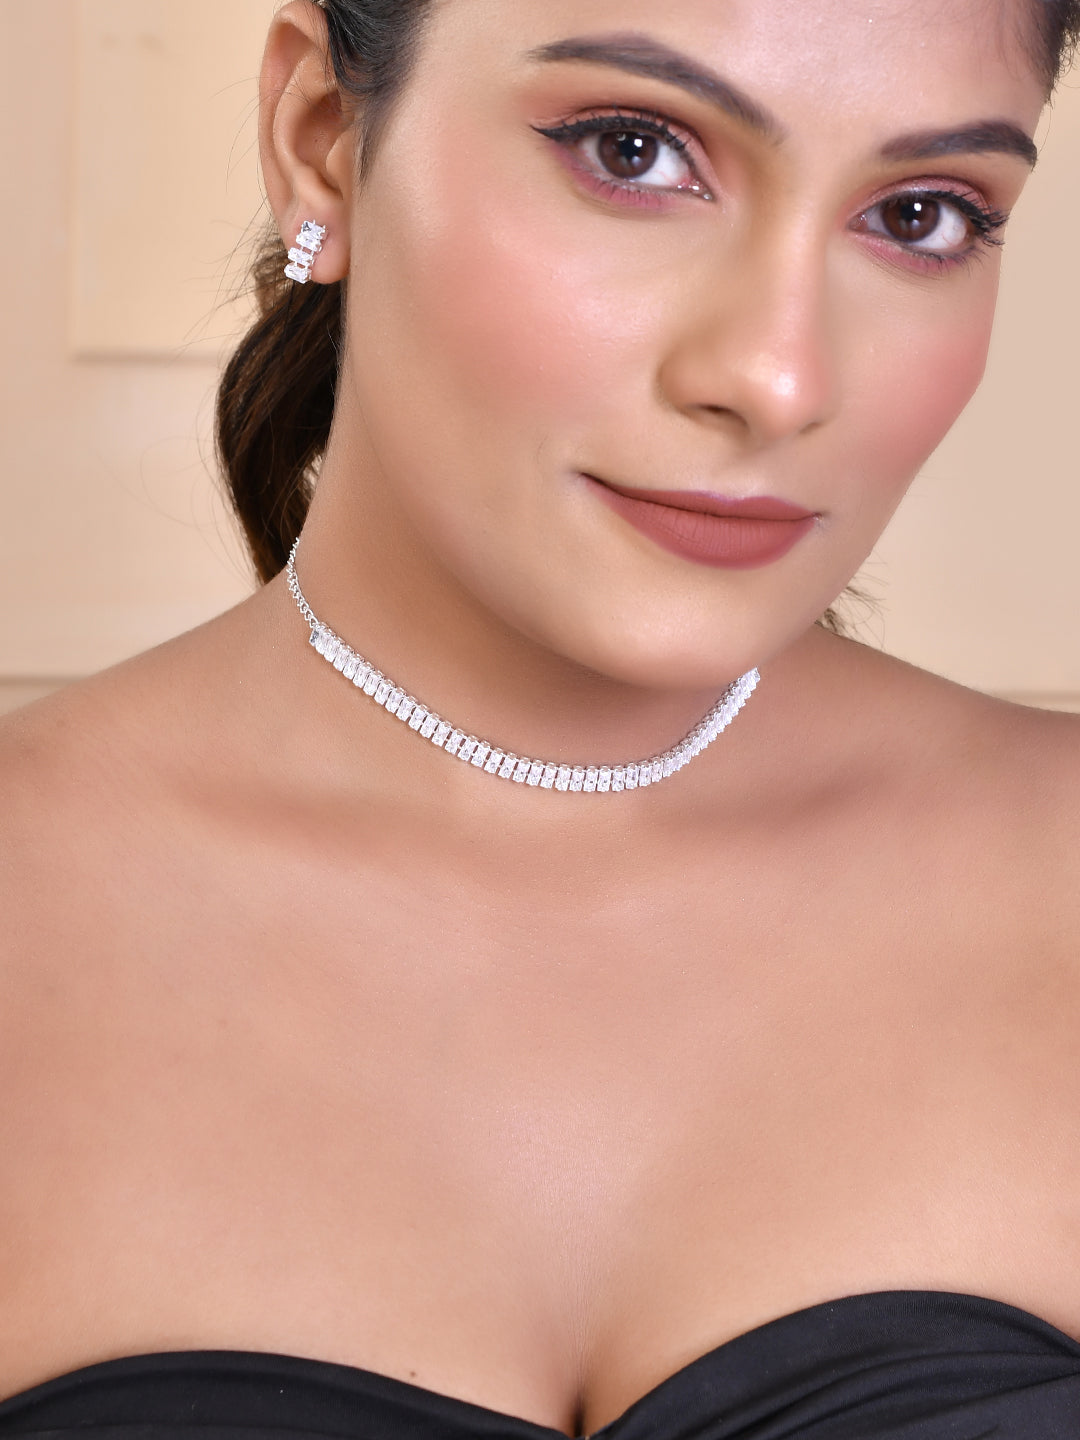 Women's Silver Plated White Cubical Beads  Choker Set With Earrings  - Voj